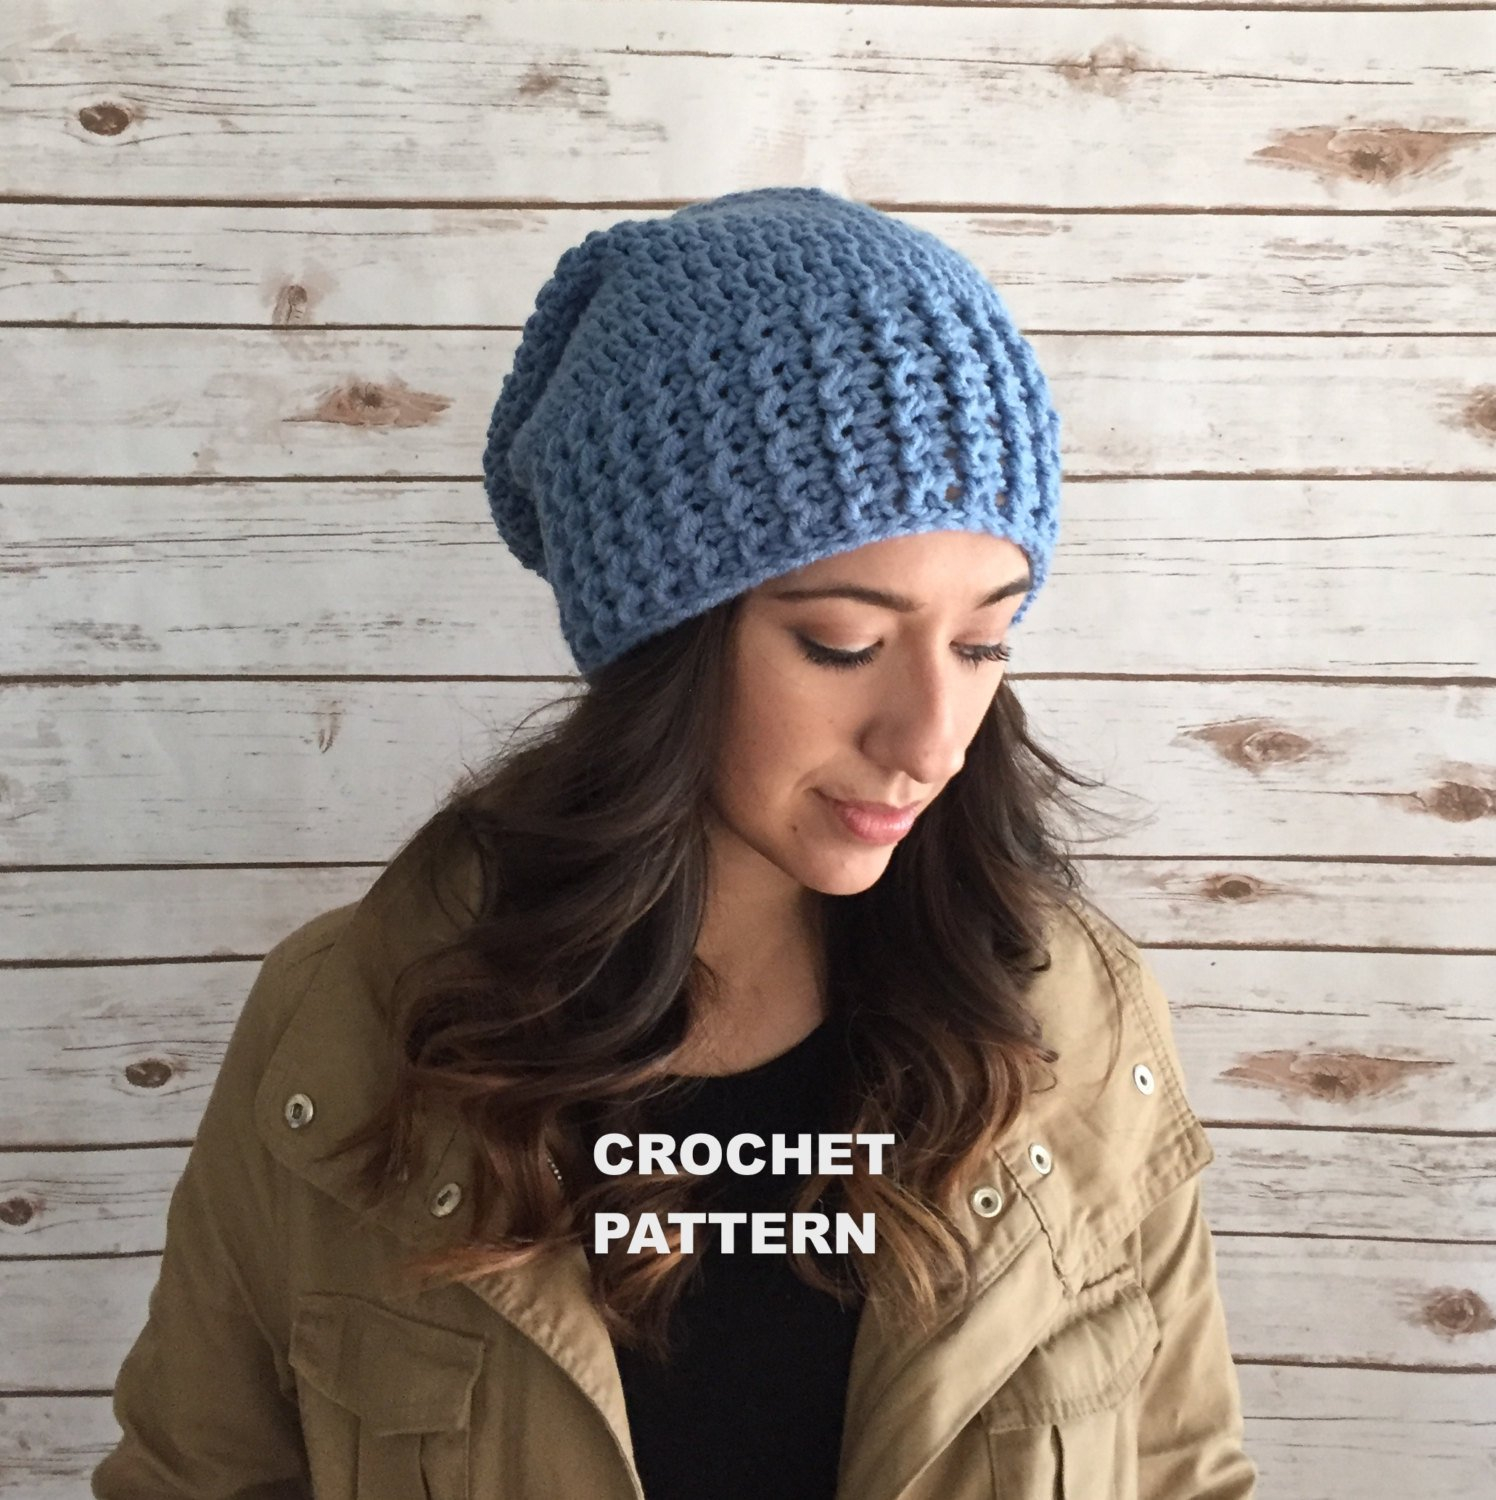 Crochet Slouchy Hat With Brim Pattern Wide Brim Crochet Slouchy Hat Pdf Pattern Super Easy Crochet Etsy